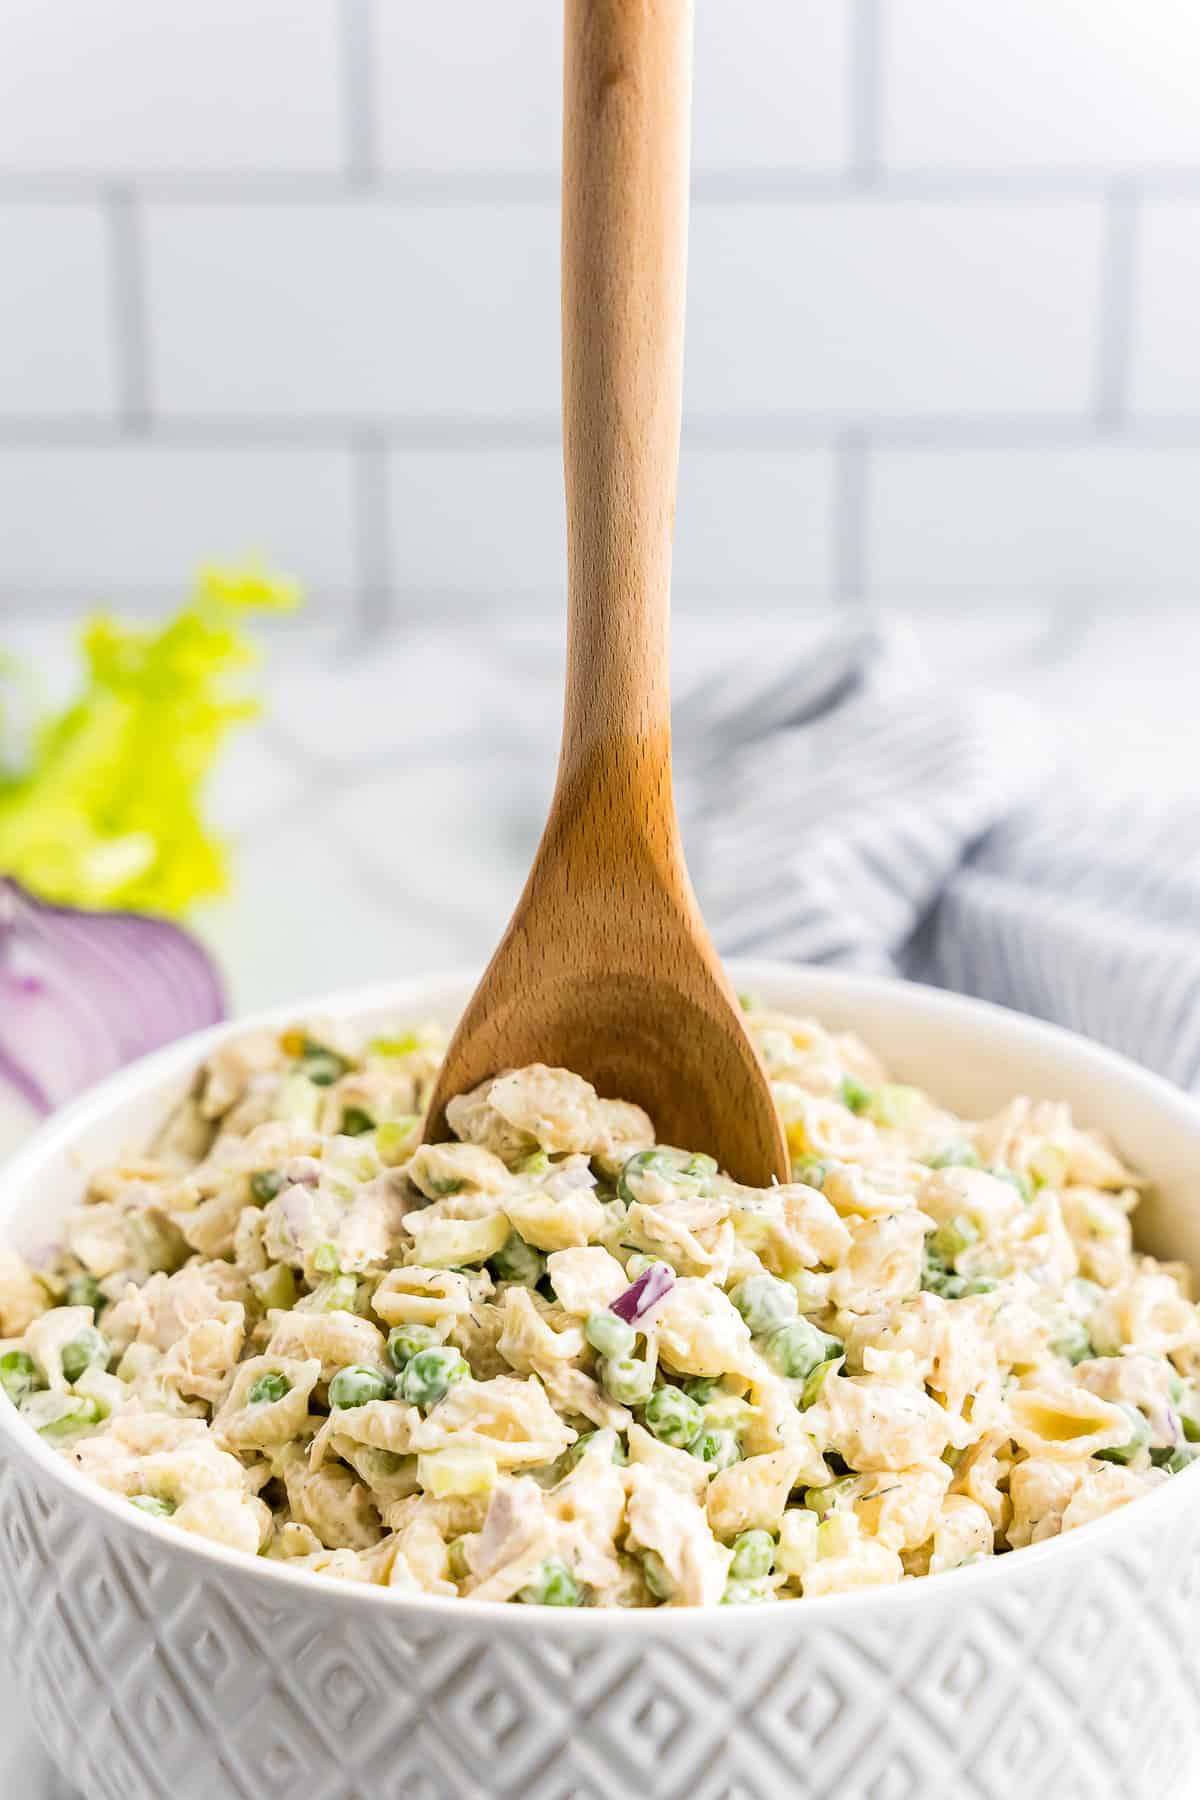 Wooden spoon in bowl of Tuna Pasta Salad